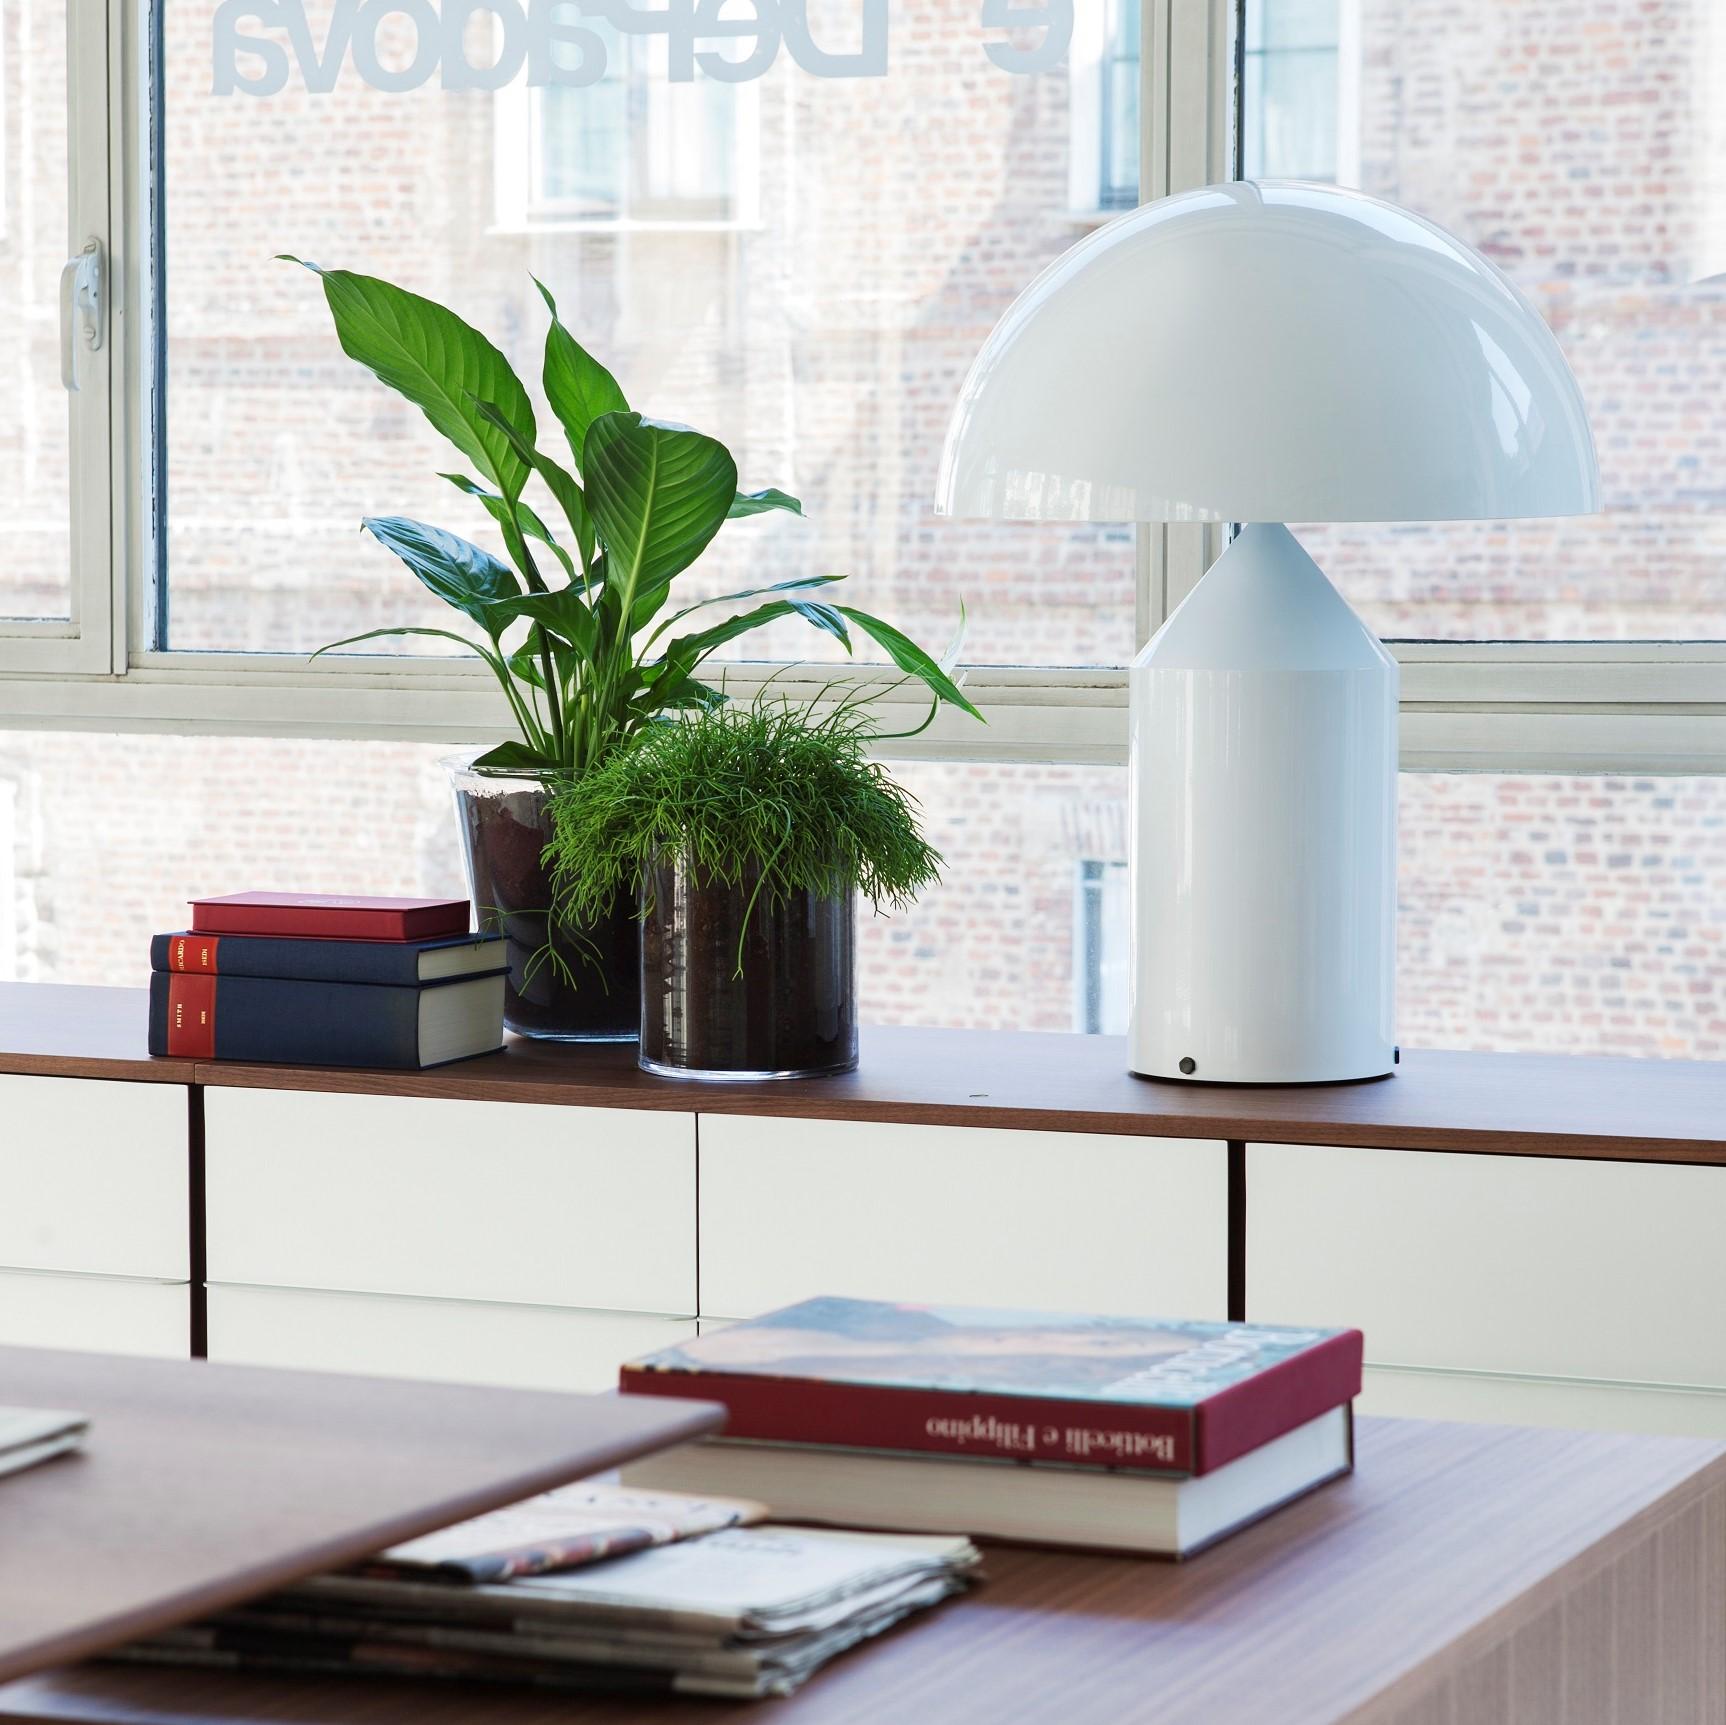 Atollo Metal Table Lamp by Vico Magistretti for Oluce. The Atollo lamp has become an iconic representation of the table lamp. The simple cylinder, cone, and hemisphere combine in such a simple but strong way highlighting form follows function. The